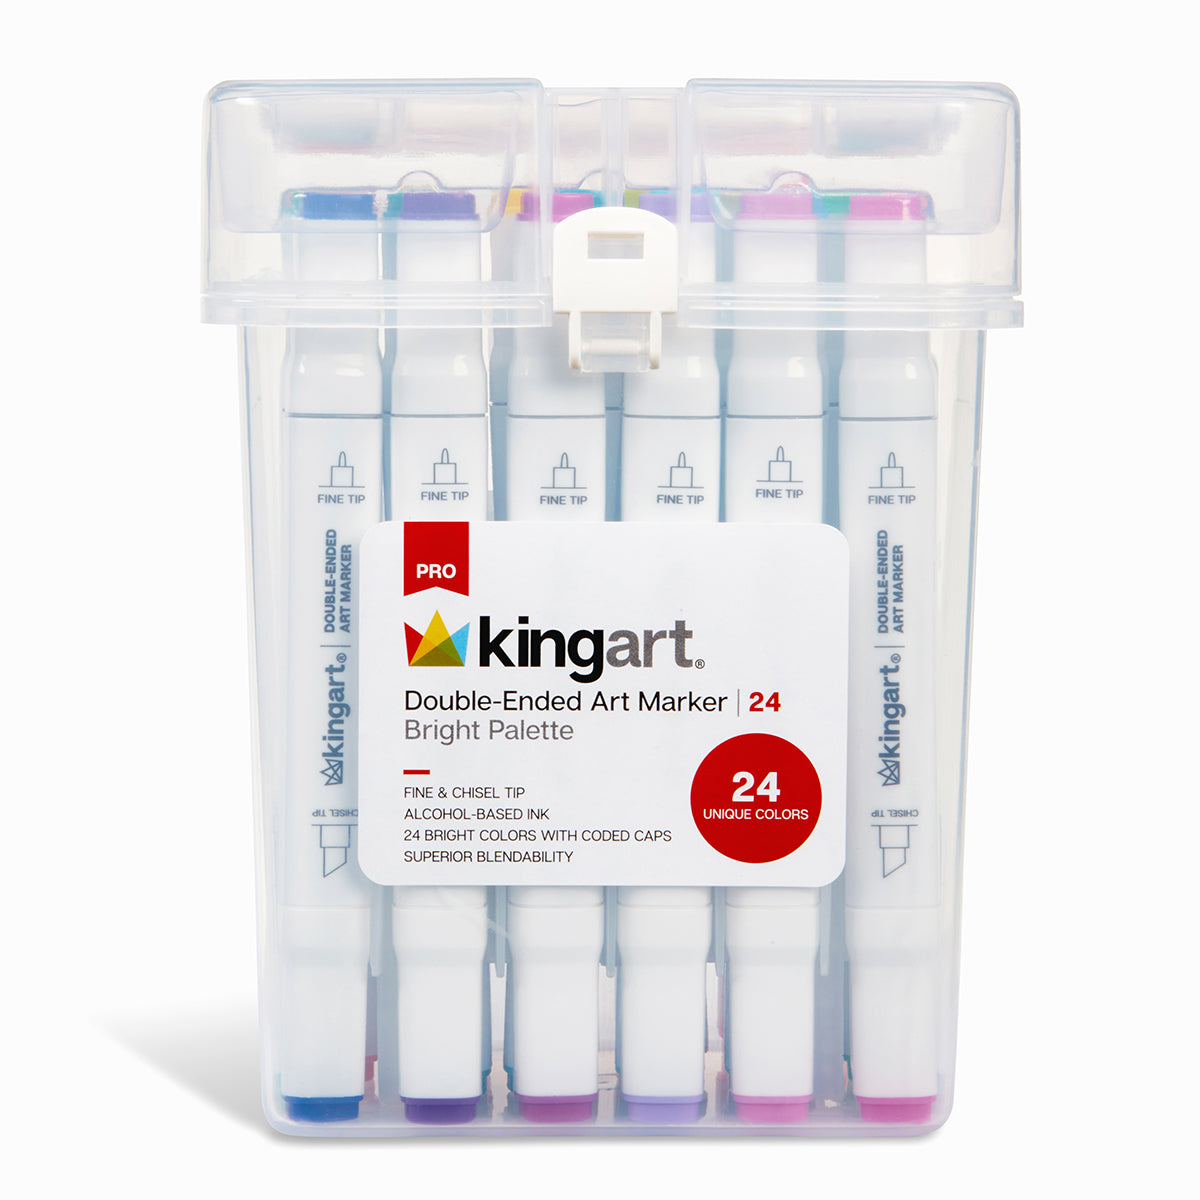 KINGART® PRO Double-Ended Art Alcohol Markers, 24 Bright Palette Colors  with Both Fine & Chisel Tips and Superior Blendability